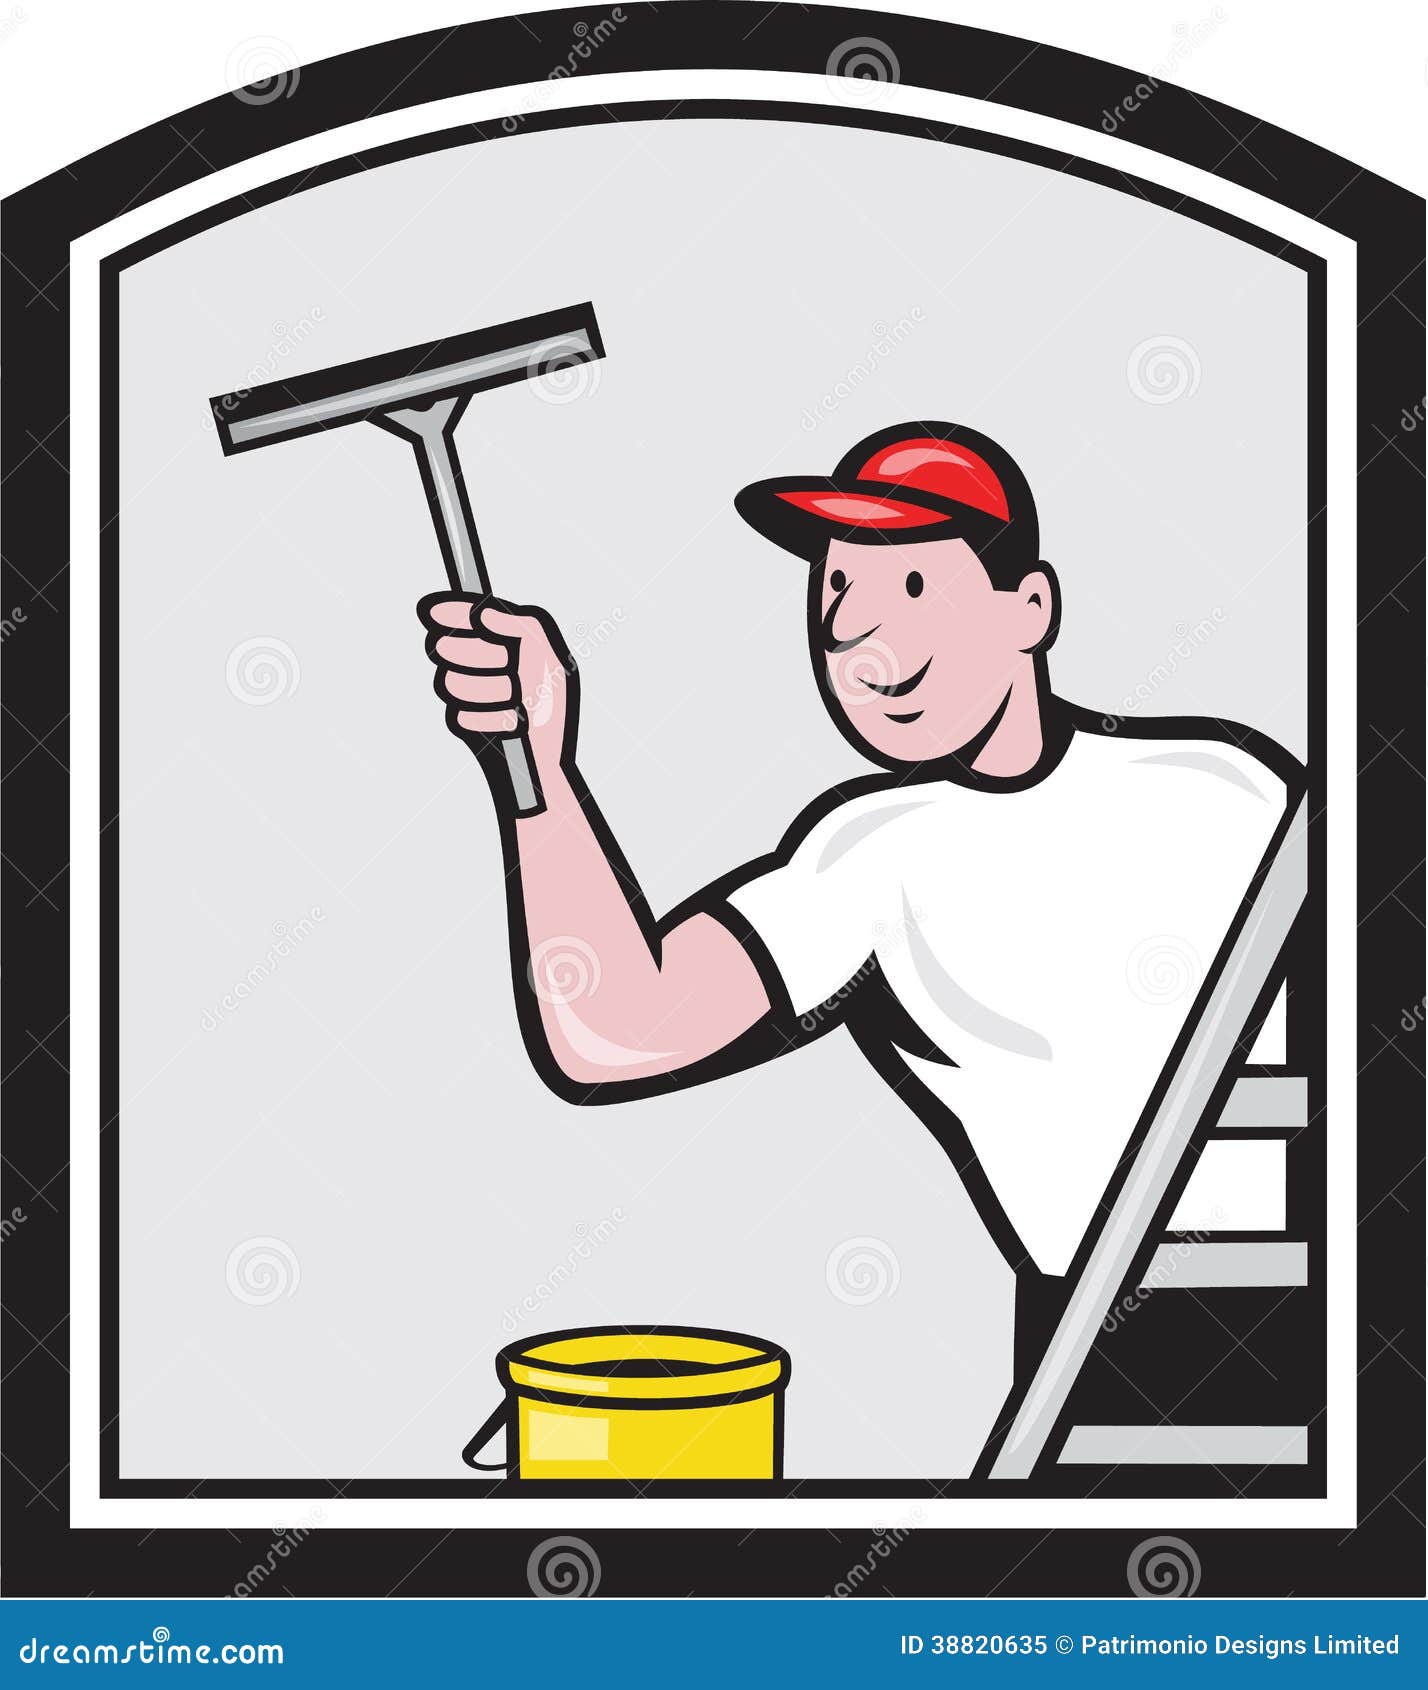 Window Washer Cleaner Cartoon Stock Vector - Illustration of ladder, cleaner:  38820635